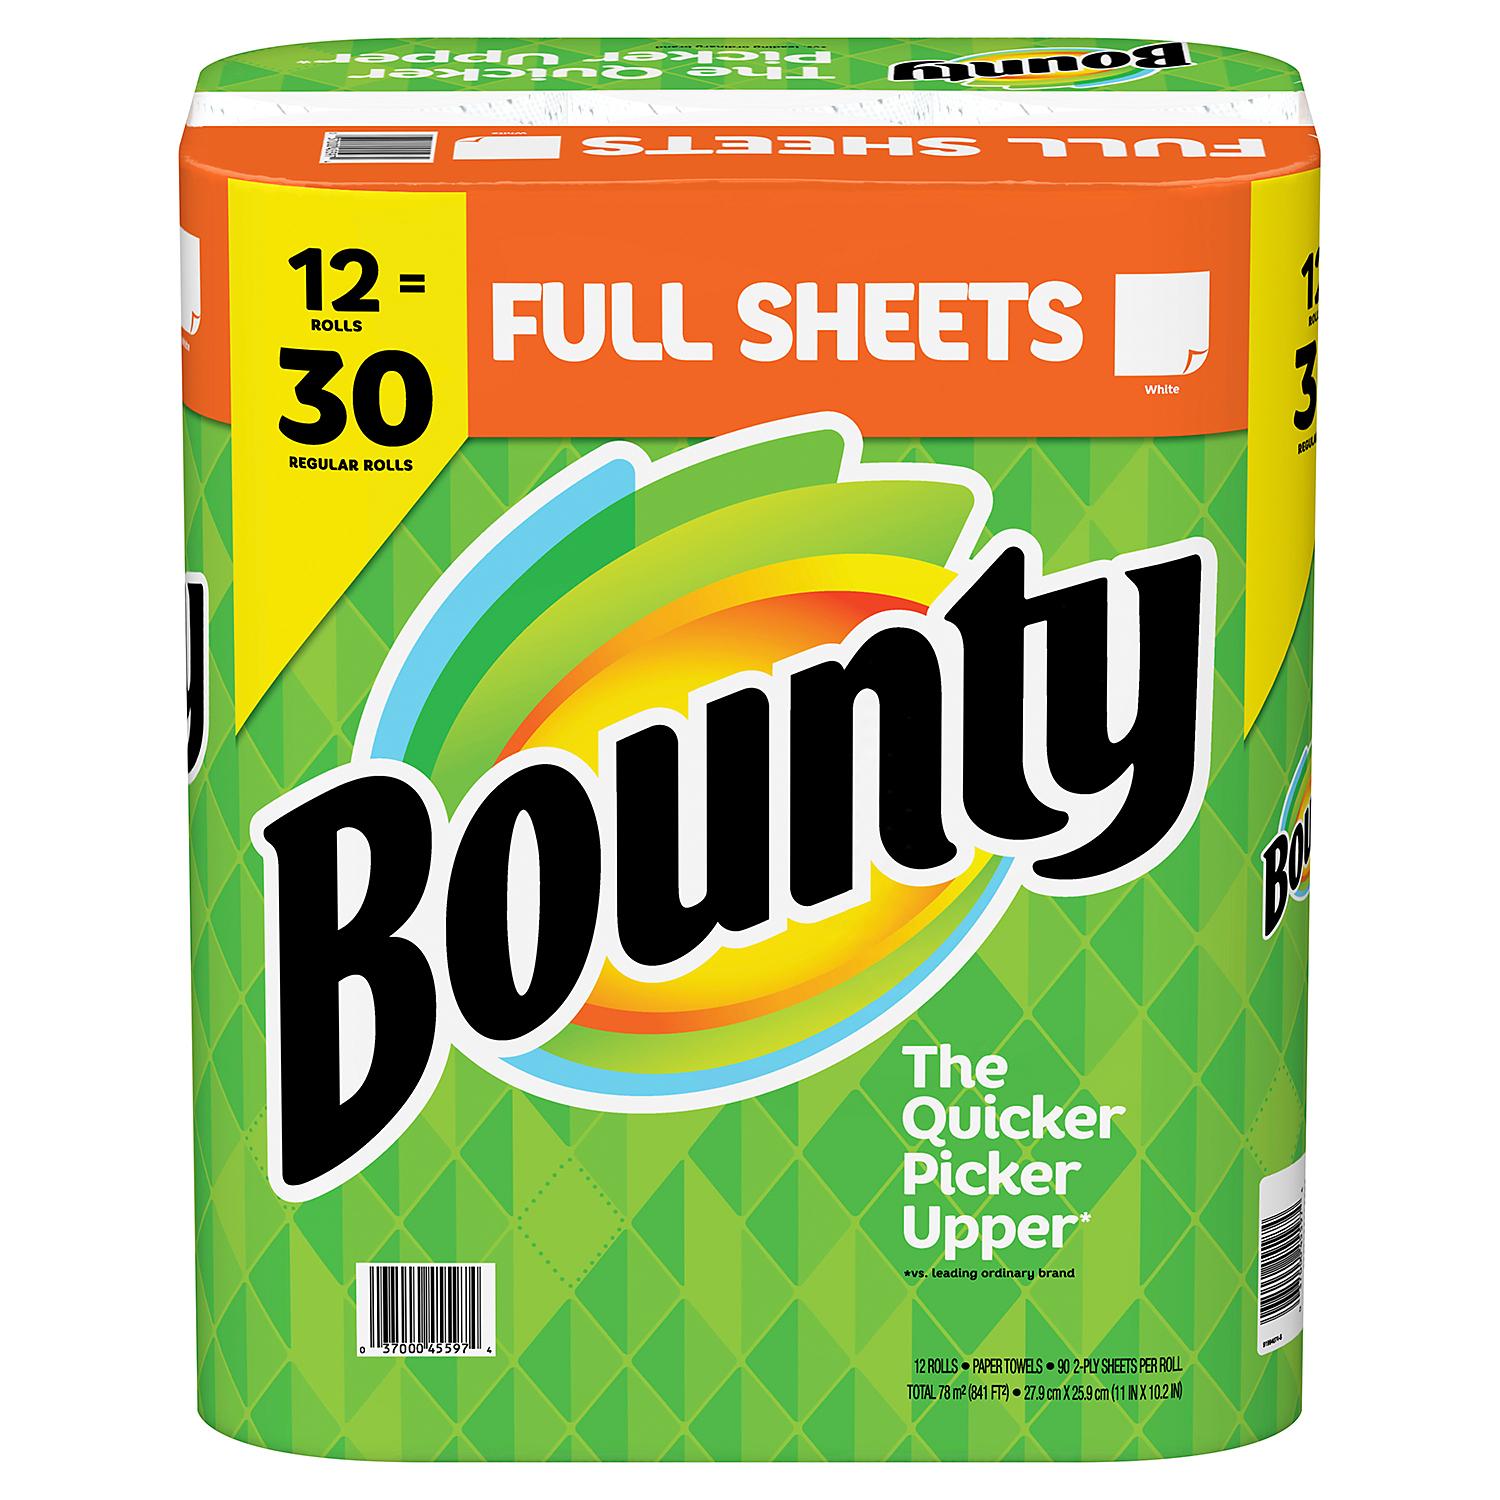 Bounty White Paper Towels Full Sheet, 12 Ct, 1 Case